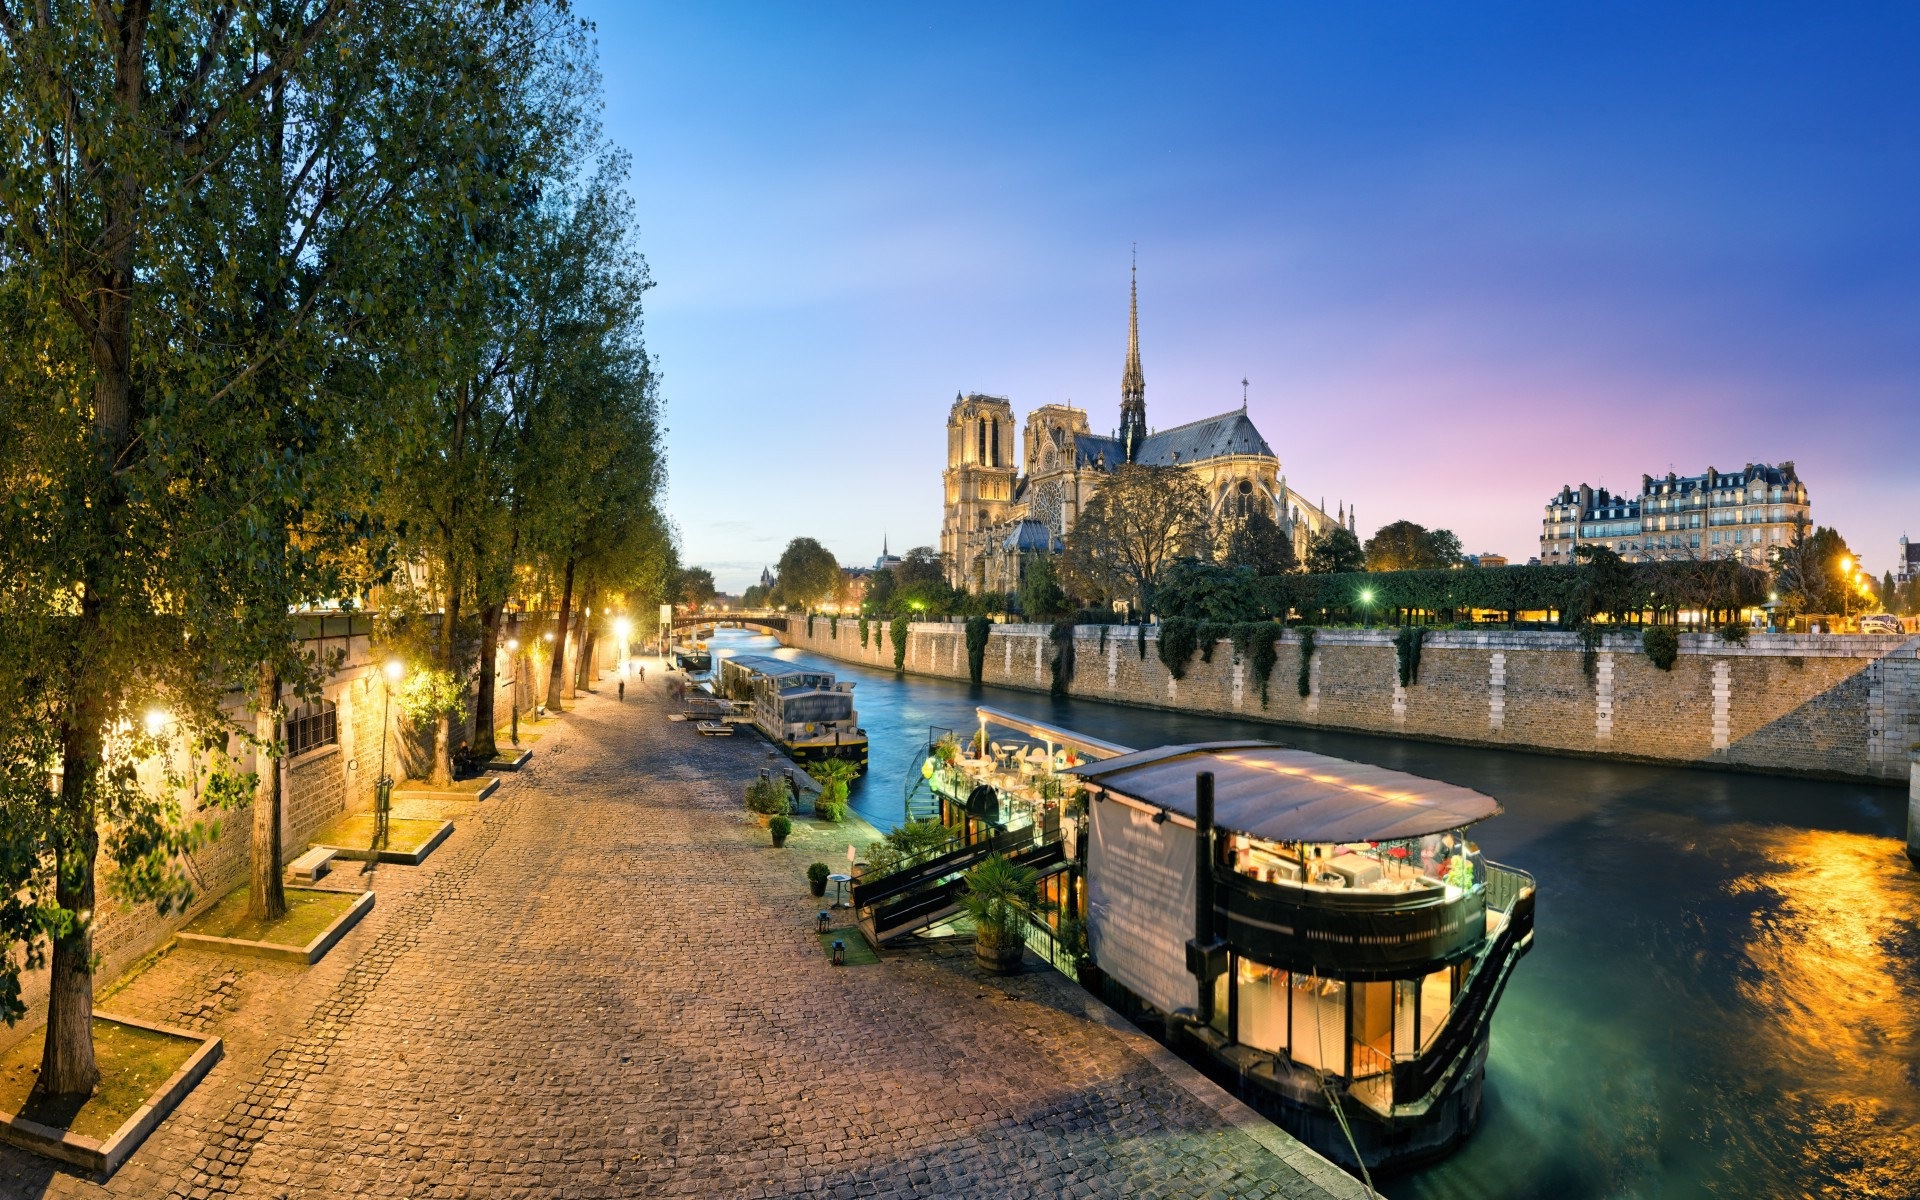 Notre Dame HD Wallpapers #3 - 1920x1200